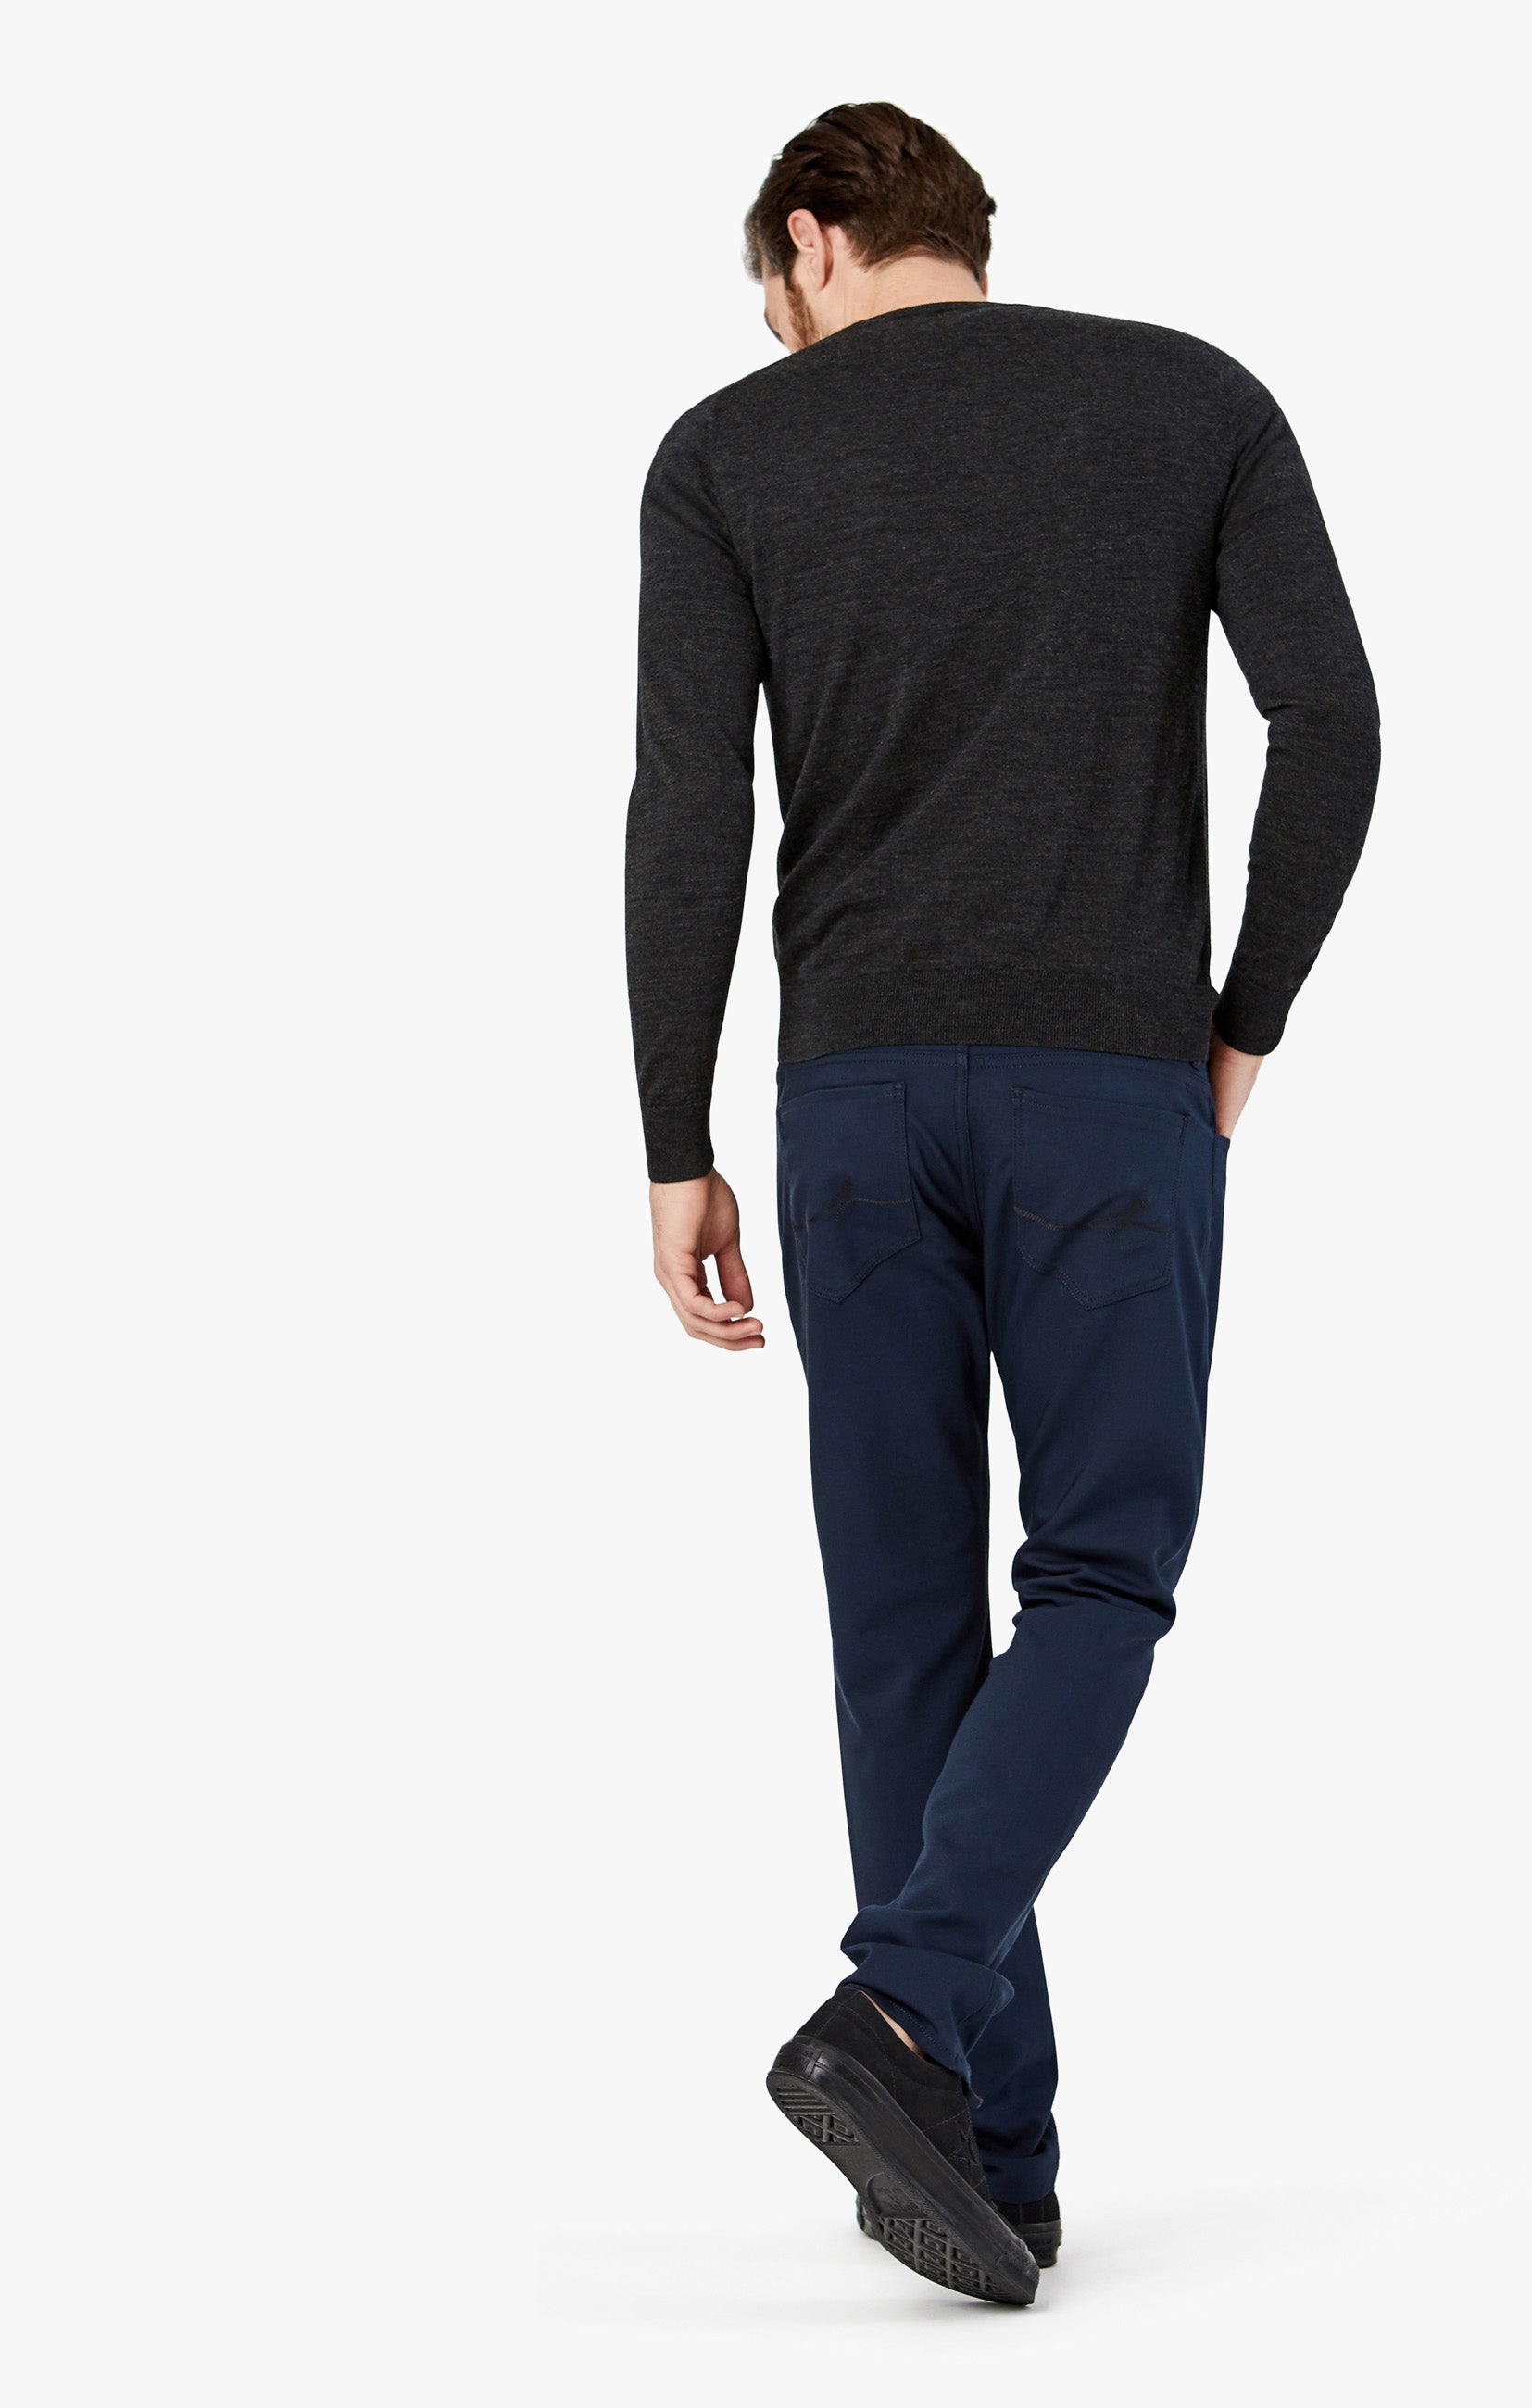 Courage Straight Leg Commuter Pants in Navy Image 2